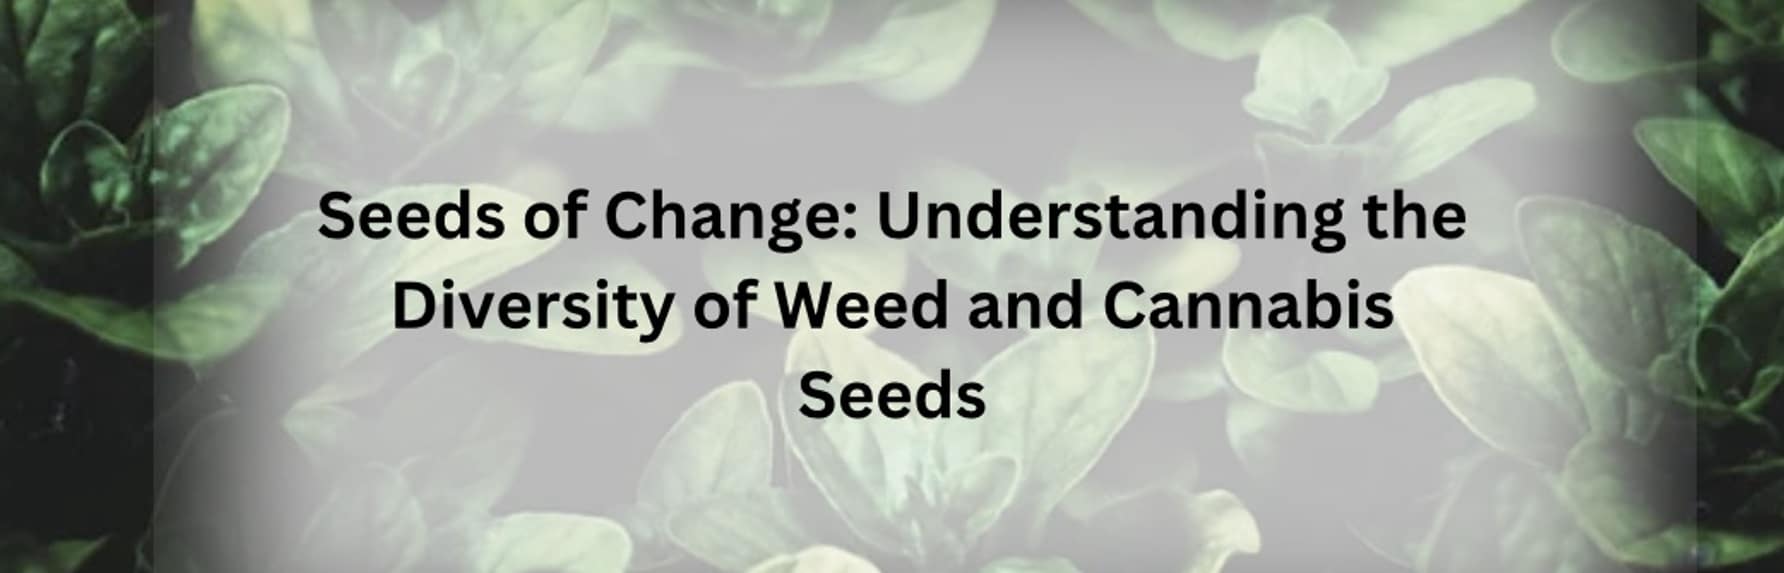 Seeds of Change: Understanding the Diversity of Weed and Cannabis Seeds